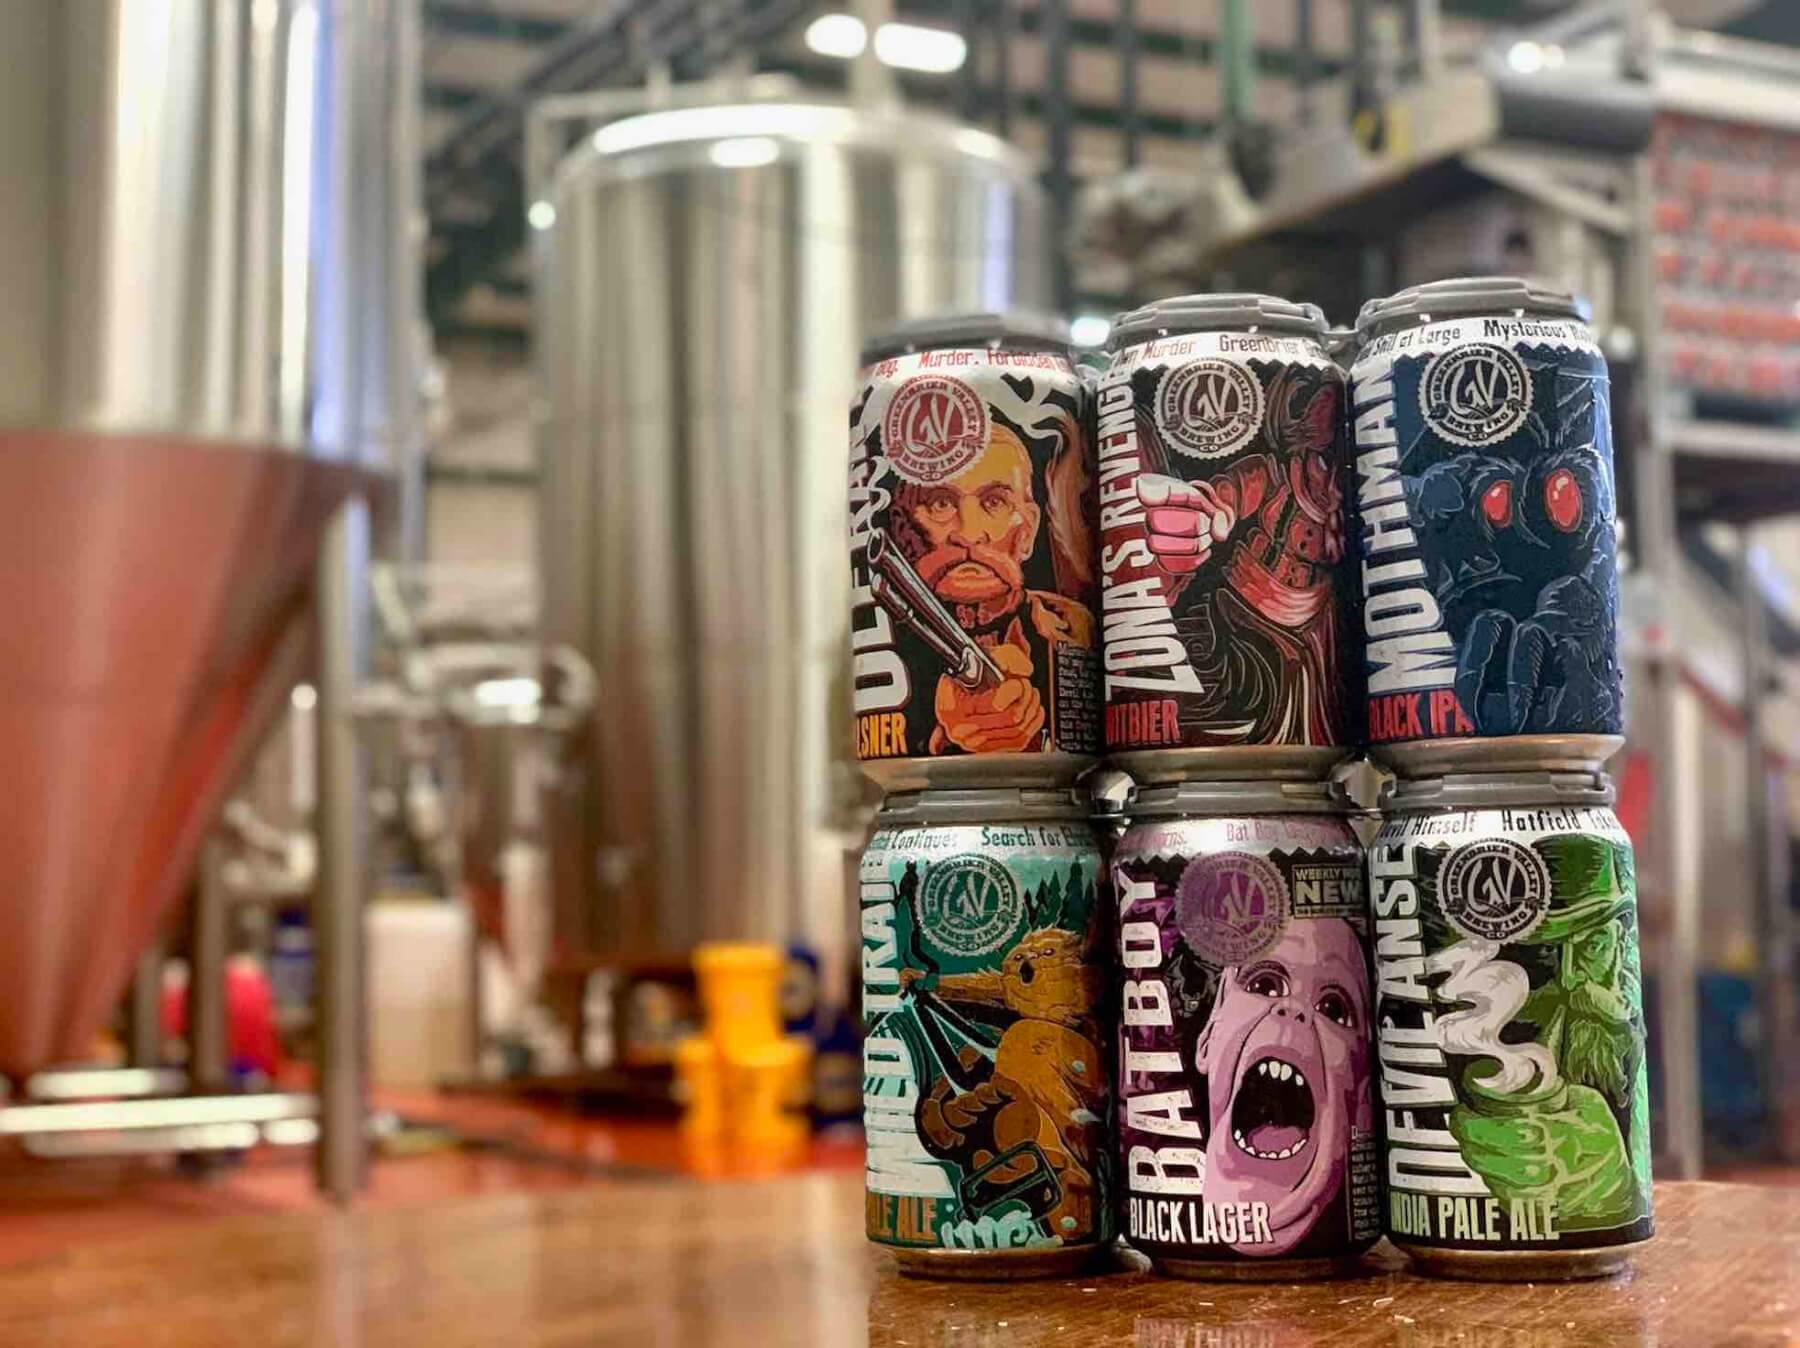 greenbrier valley brewing company west virginia made craft beer can lineup at brewery